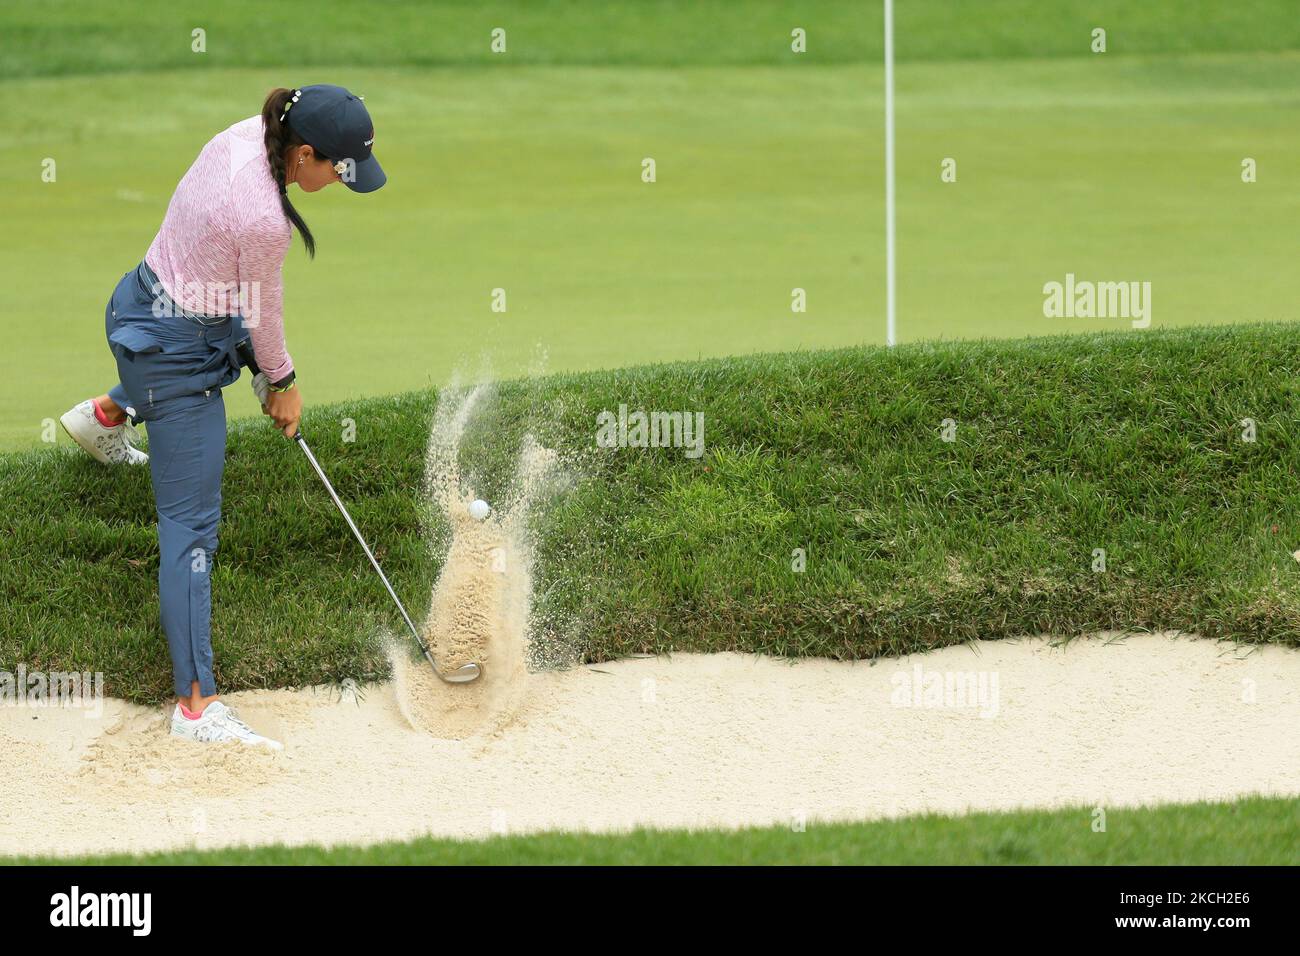 Jaye Marie Green hits out of the bunker toward the second green during the second round of the Marathon LPGA Classic presented by Dana golf tournament at Highland Meadows Golf Club in Sylvania, Ohio USA, on Friday, July 9, 2021. (Photo by Jorge Lemus/NurPhoto) Stock Photo